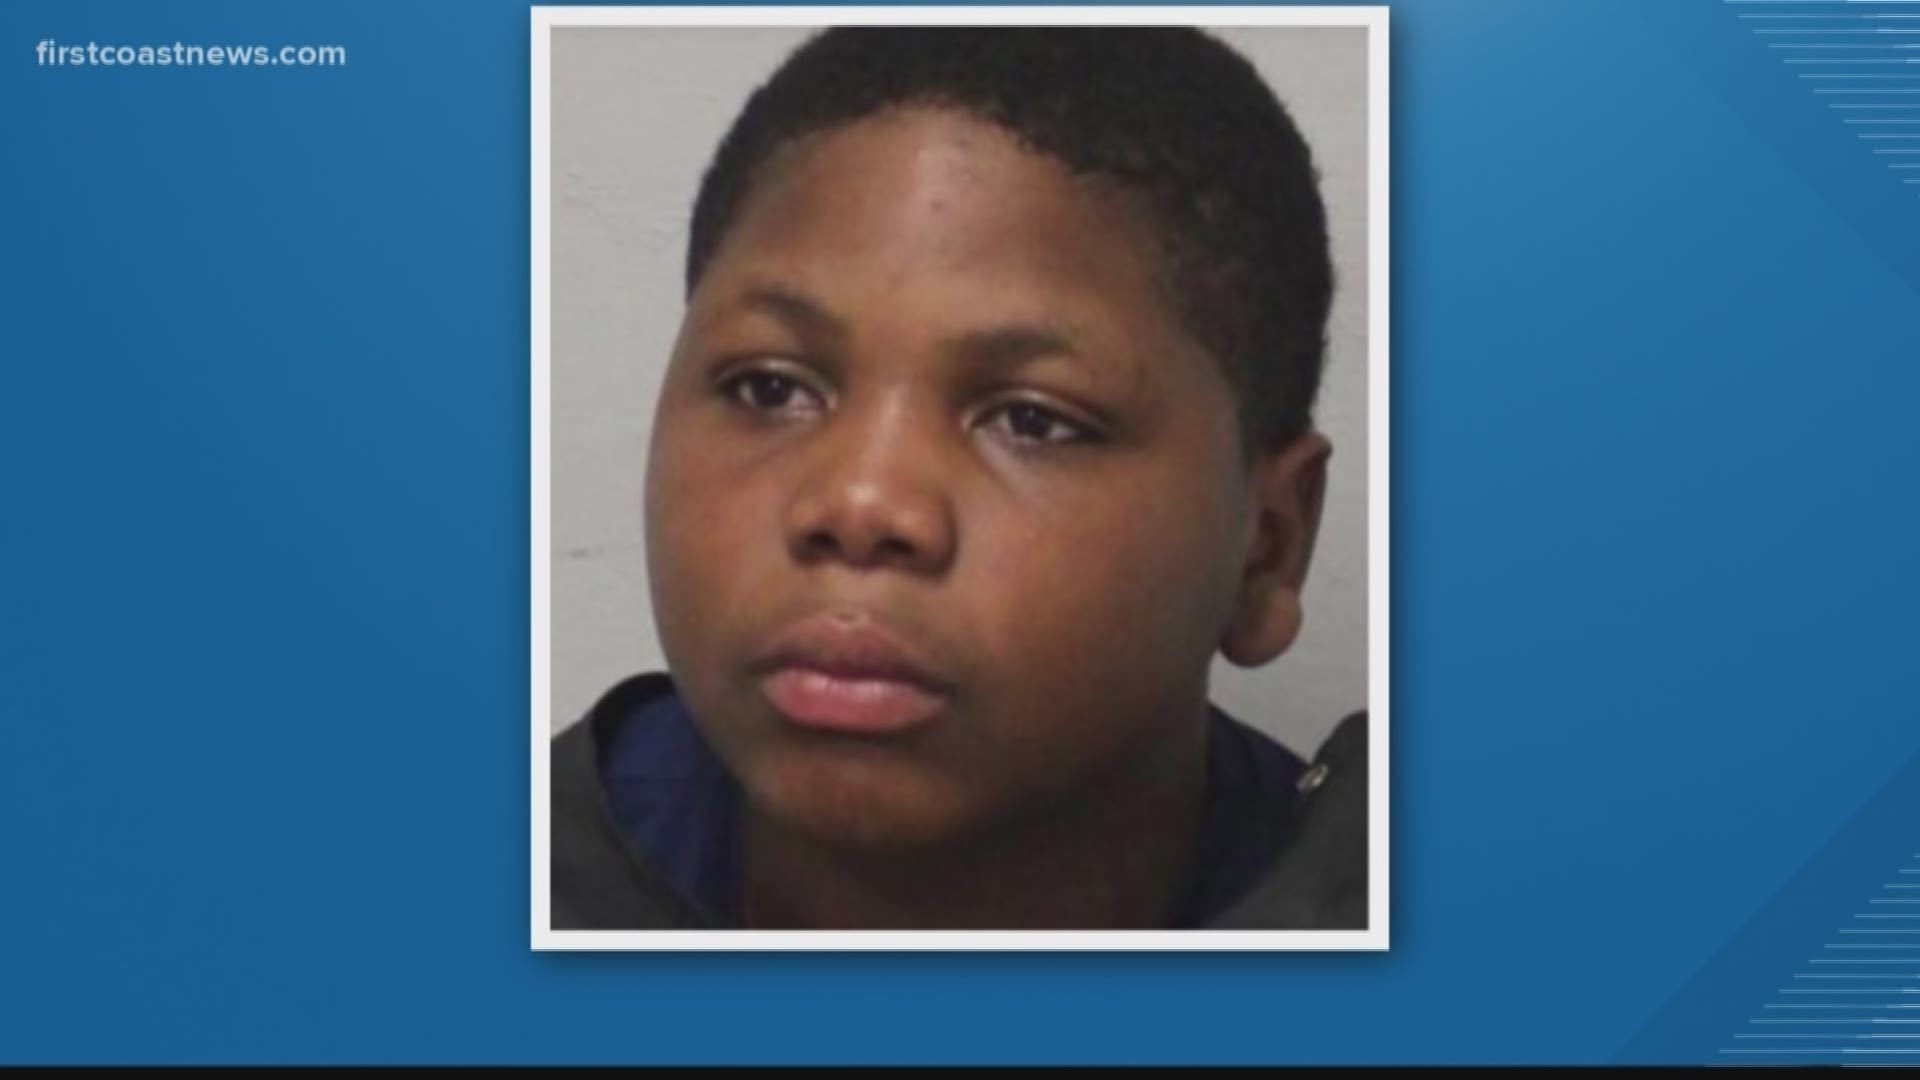 Police say Johnathan Godwin, 14, repeatedly punched a 3-year-old girl in her chest and head in August because she was crying. He is charged with murder.